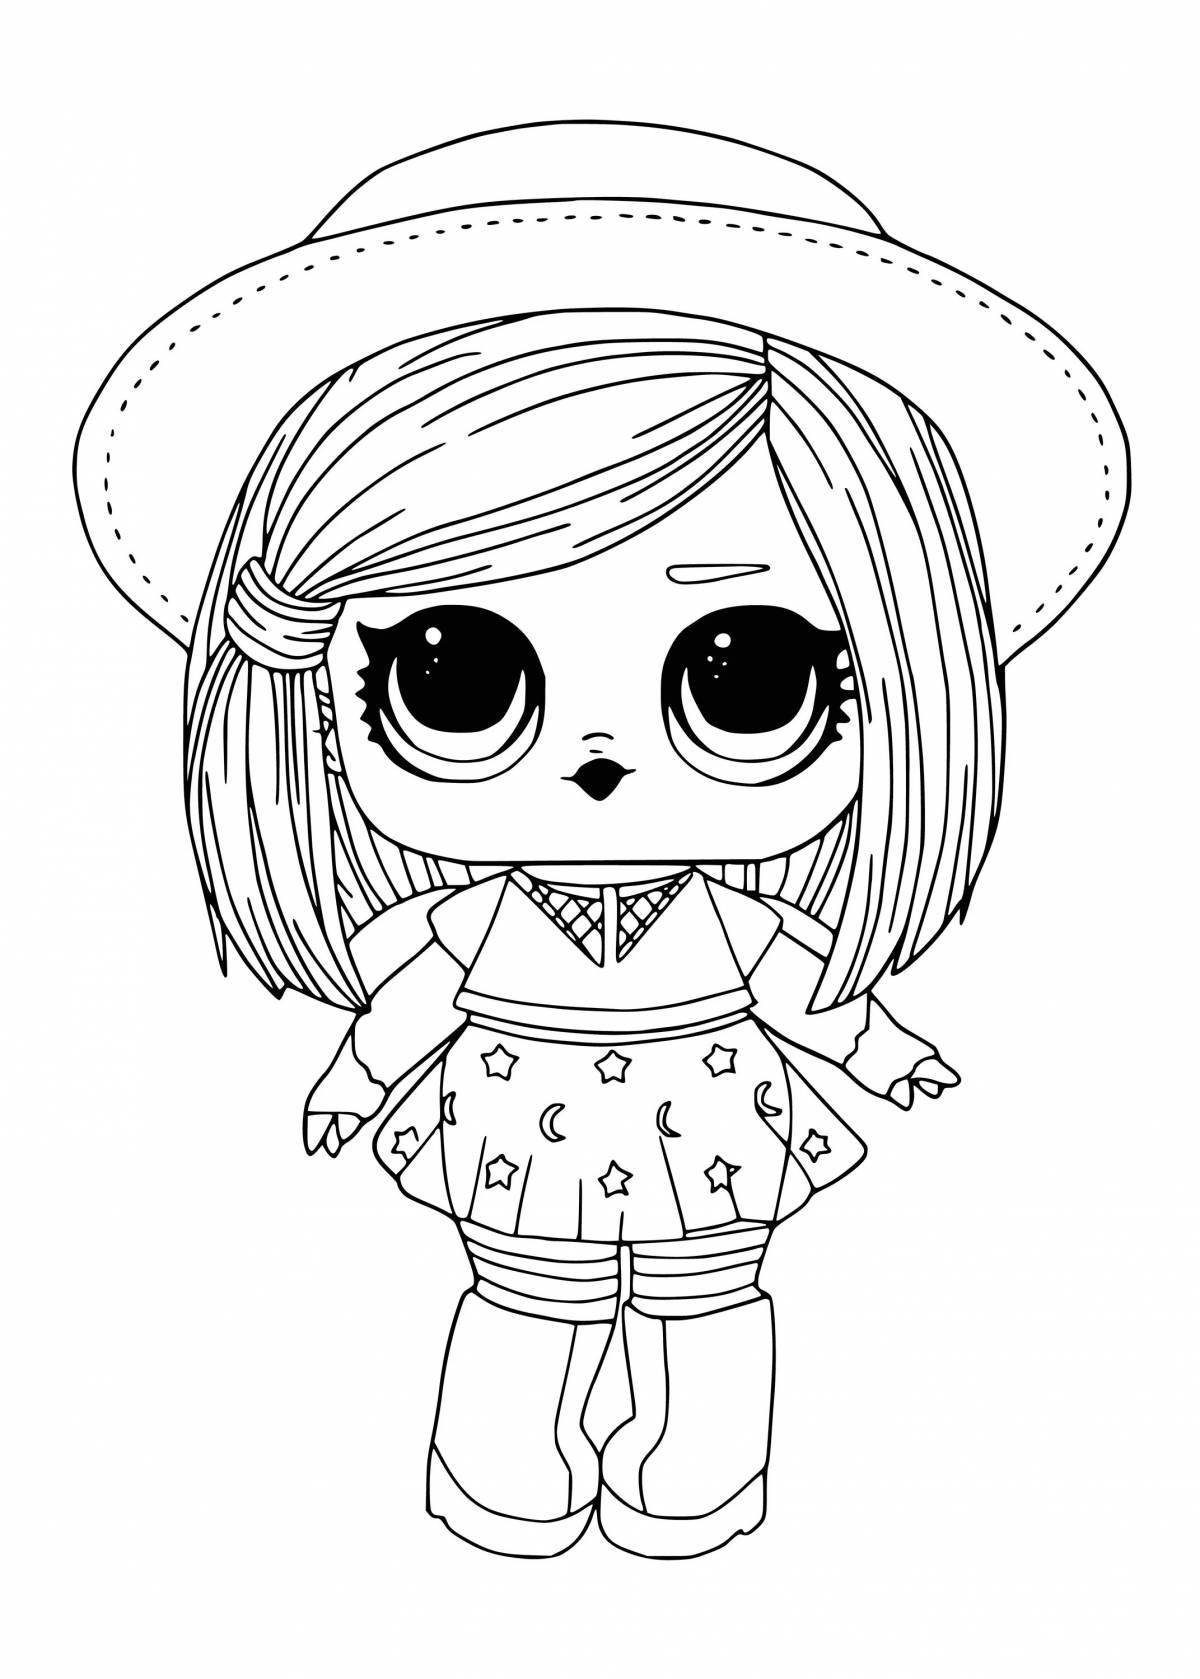 Radiant coloring page drawings for girls lol dolls